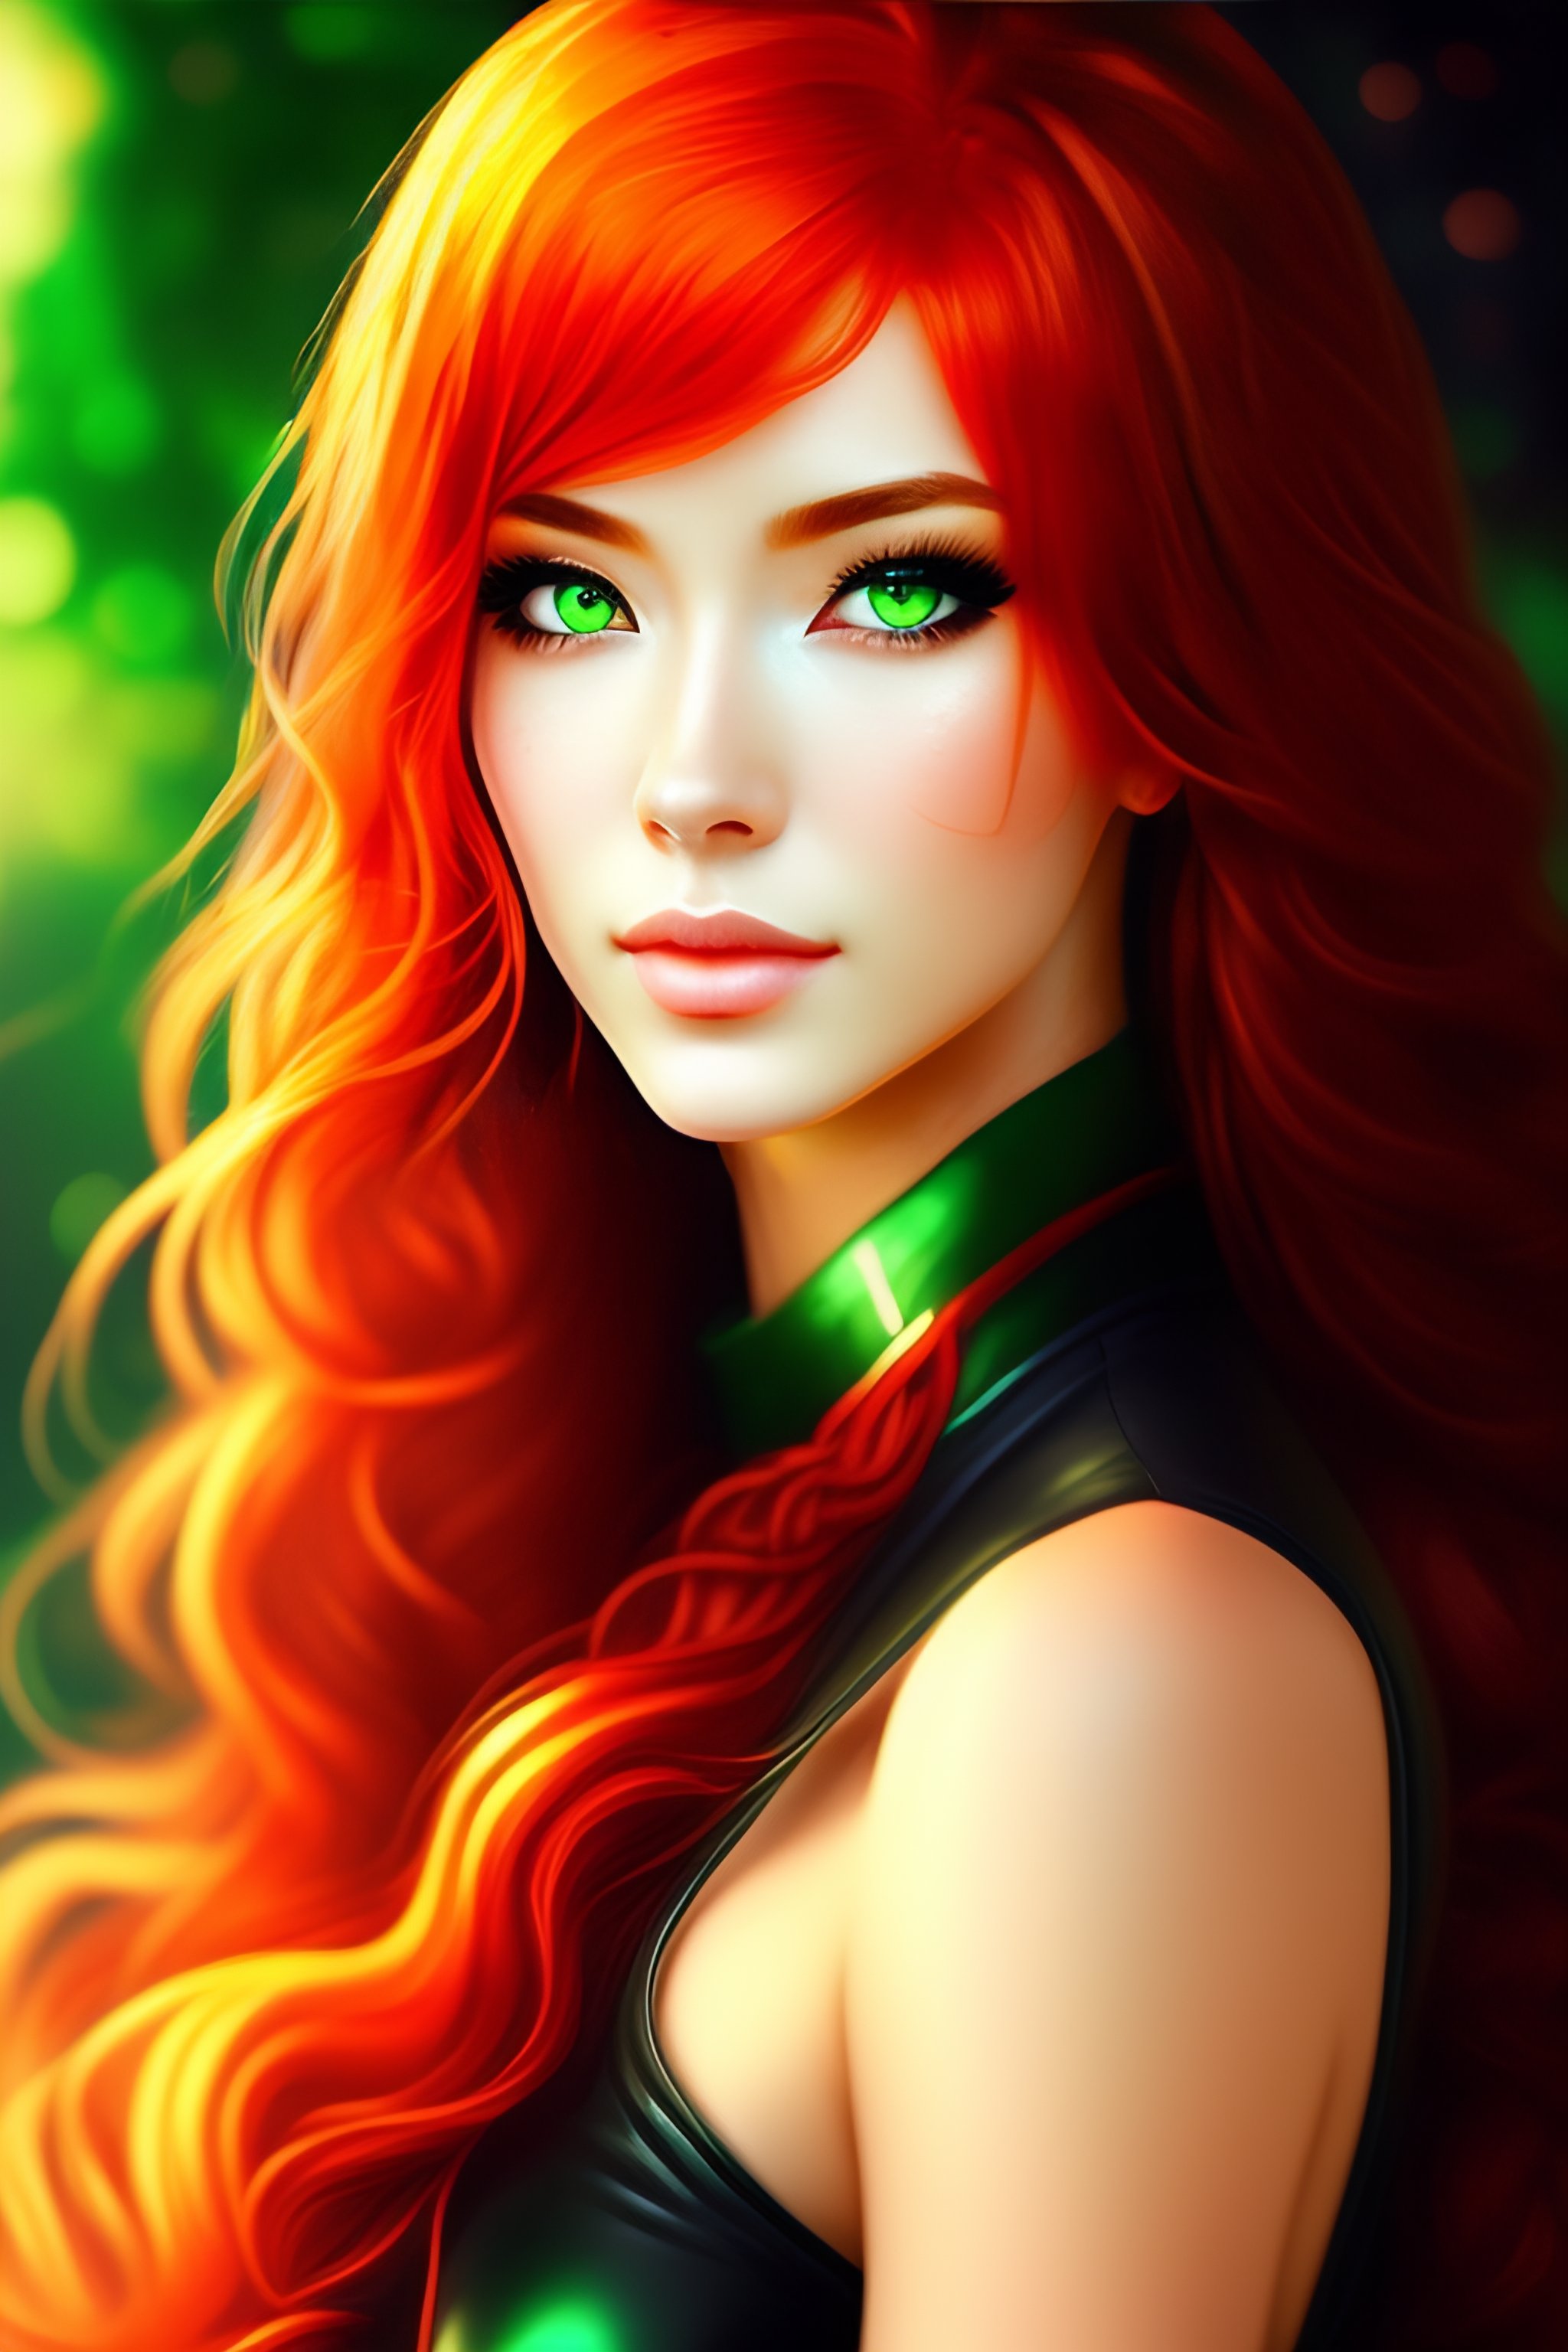 Lexica Anime Style Image Of Beautiful Woman With Red Hair And Green Eyes